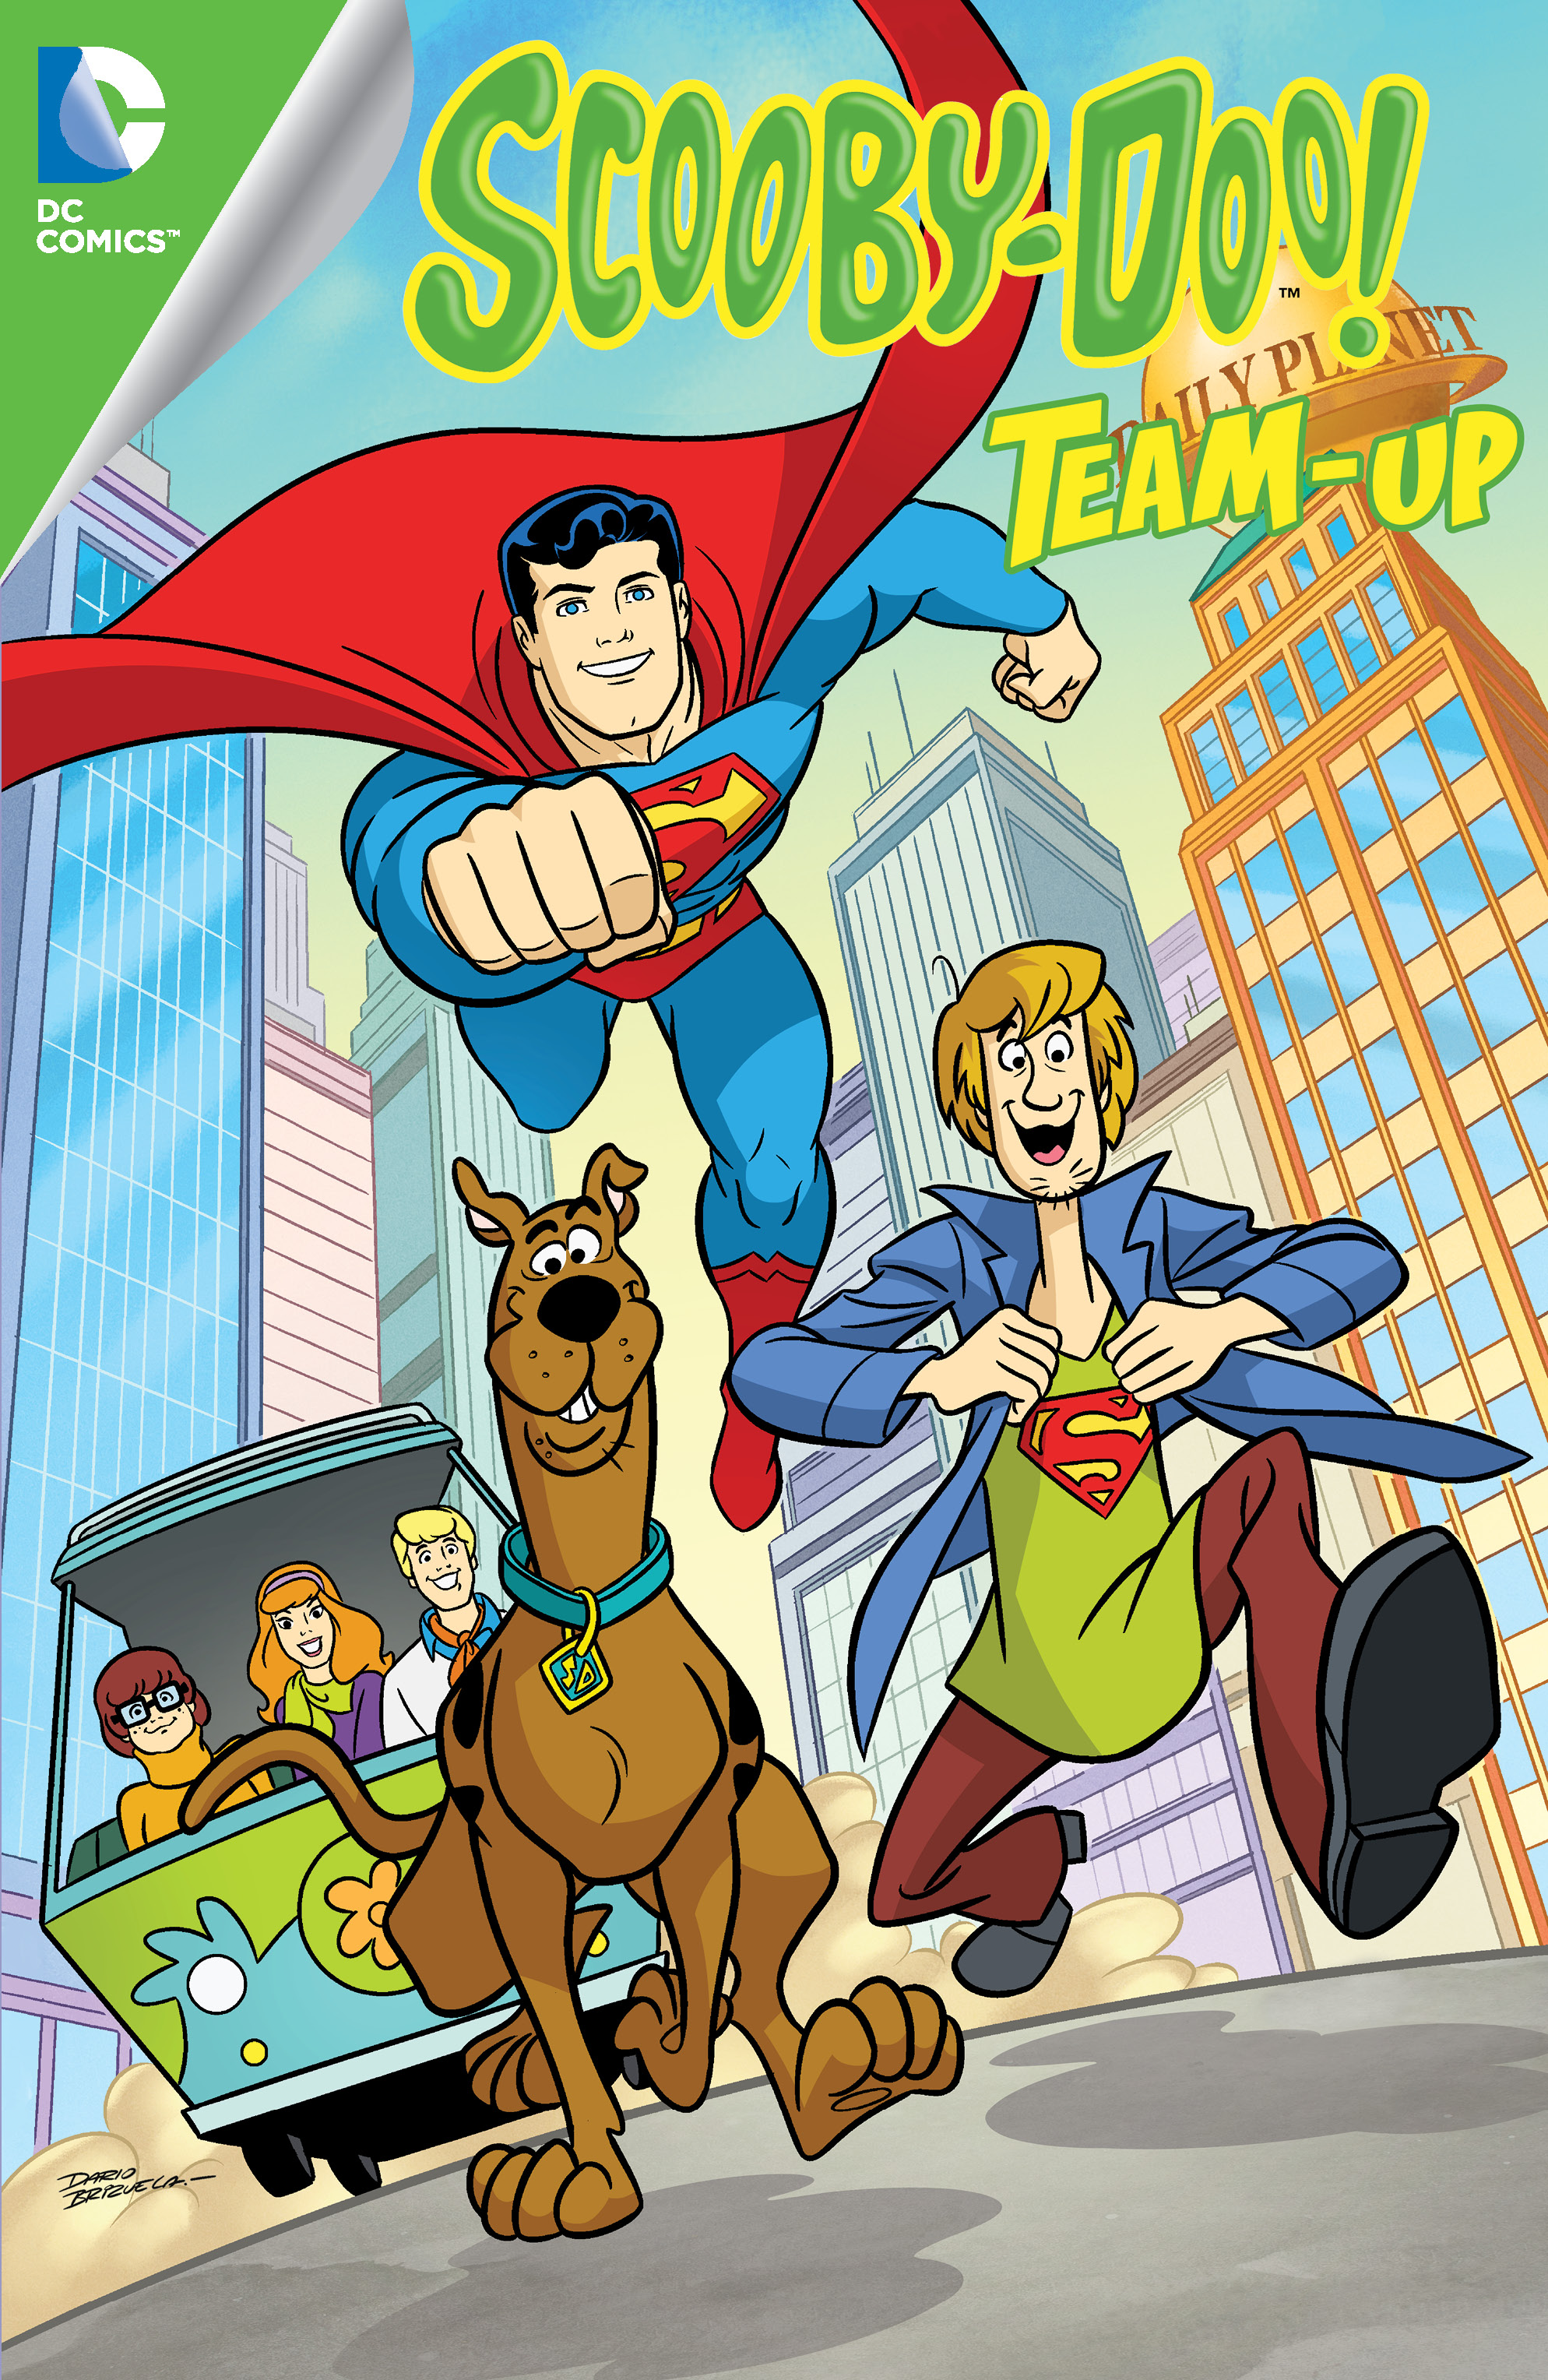 Read online Scooby-Doo! Team-Up comic -  Issue #97 - 2